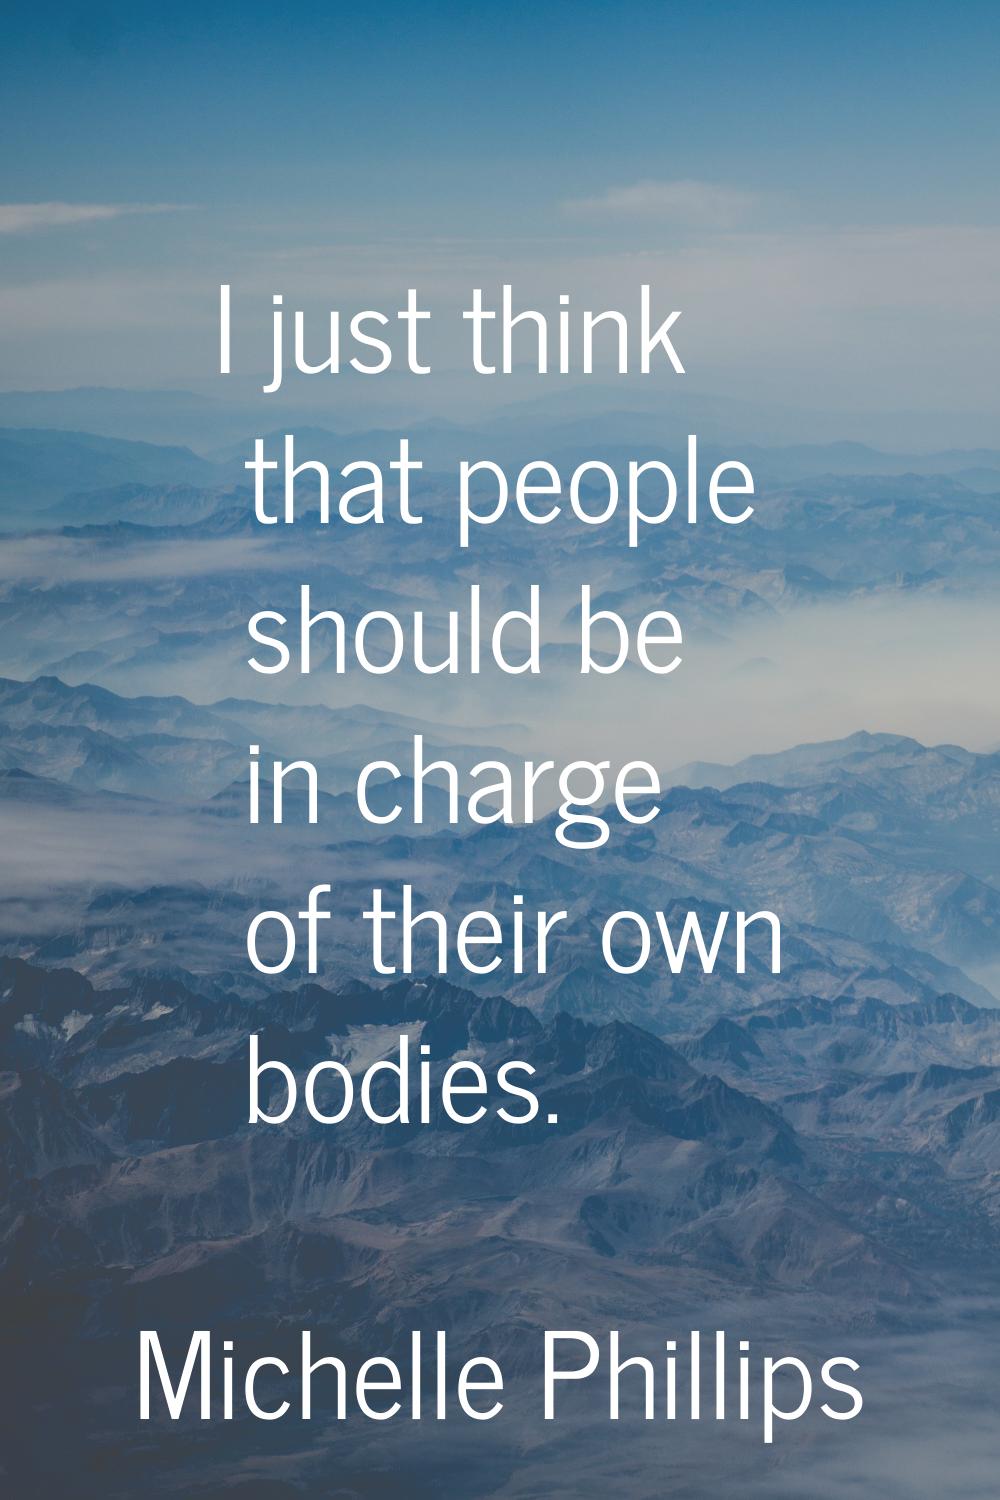 I just think that people should be in charge of their own bodies.